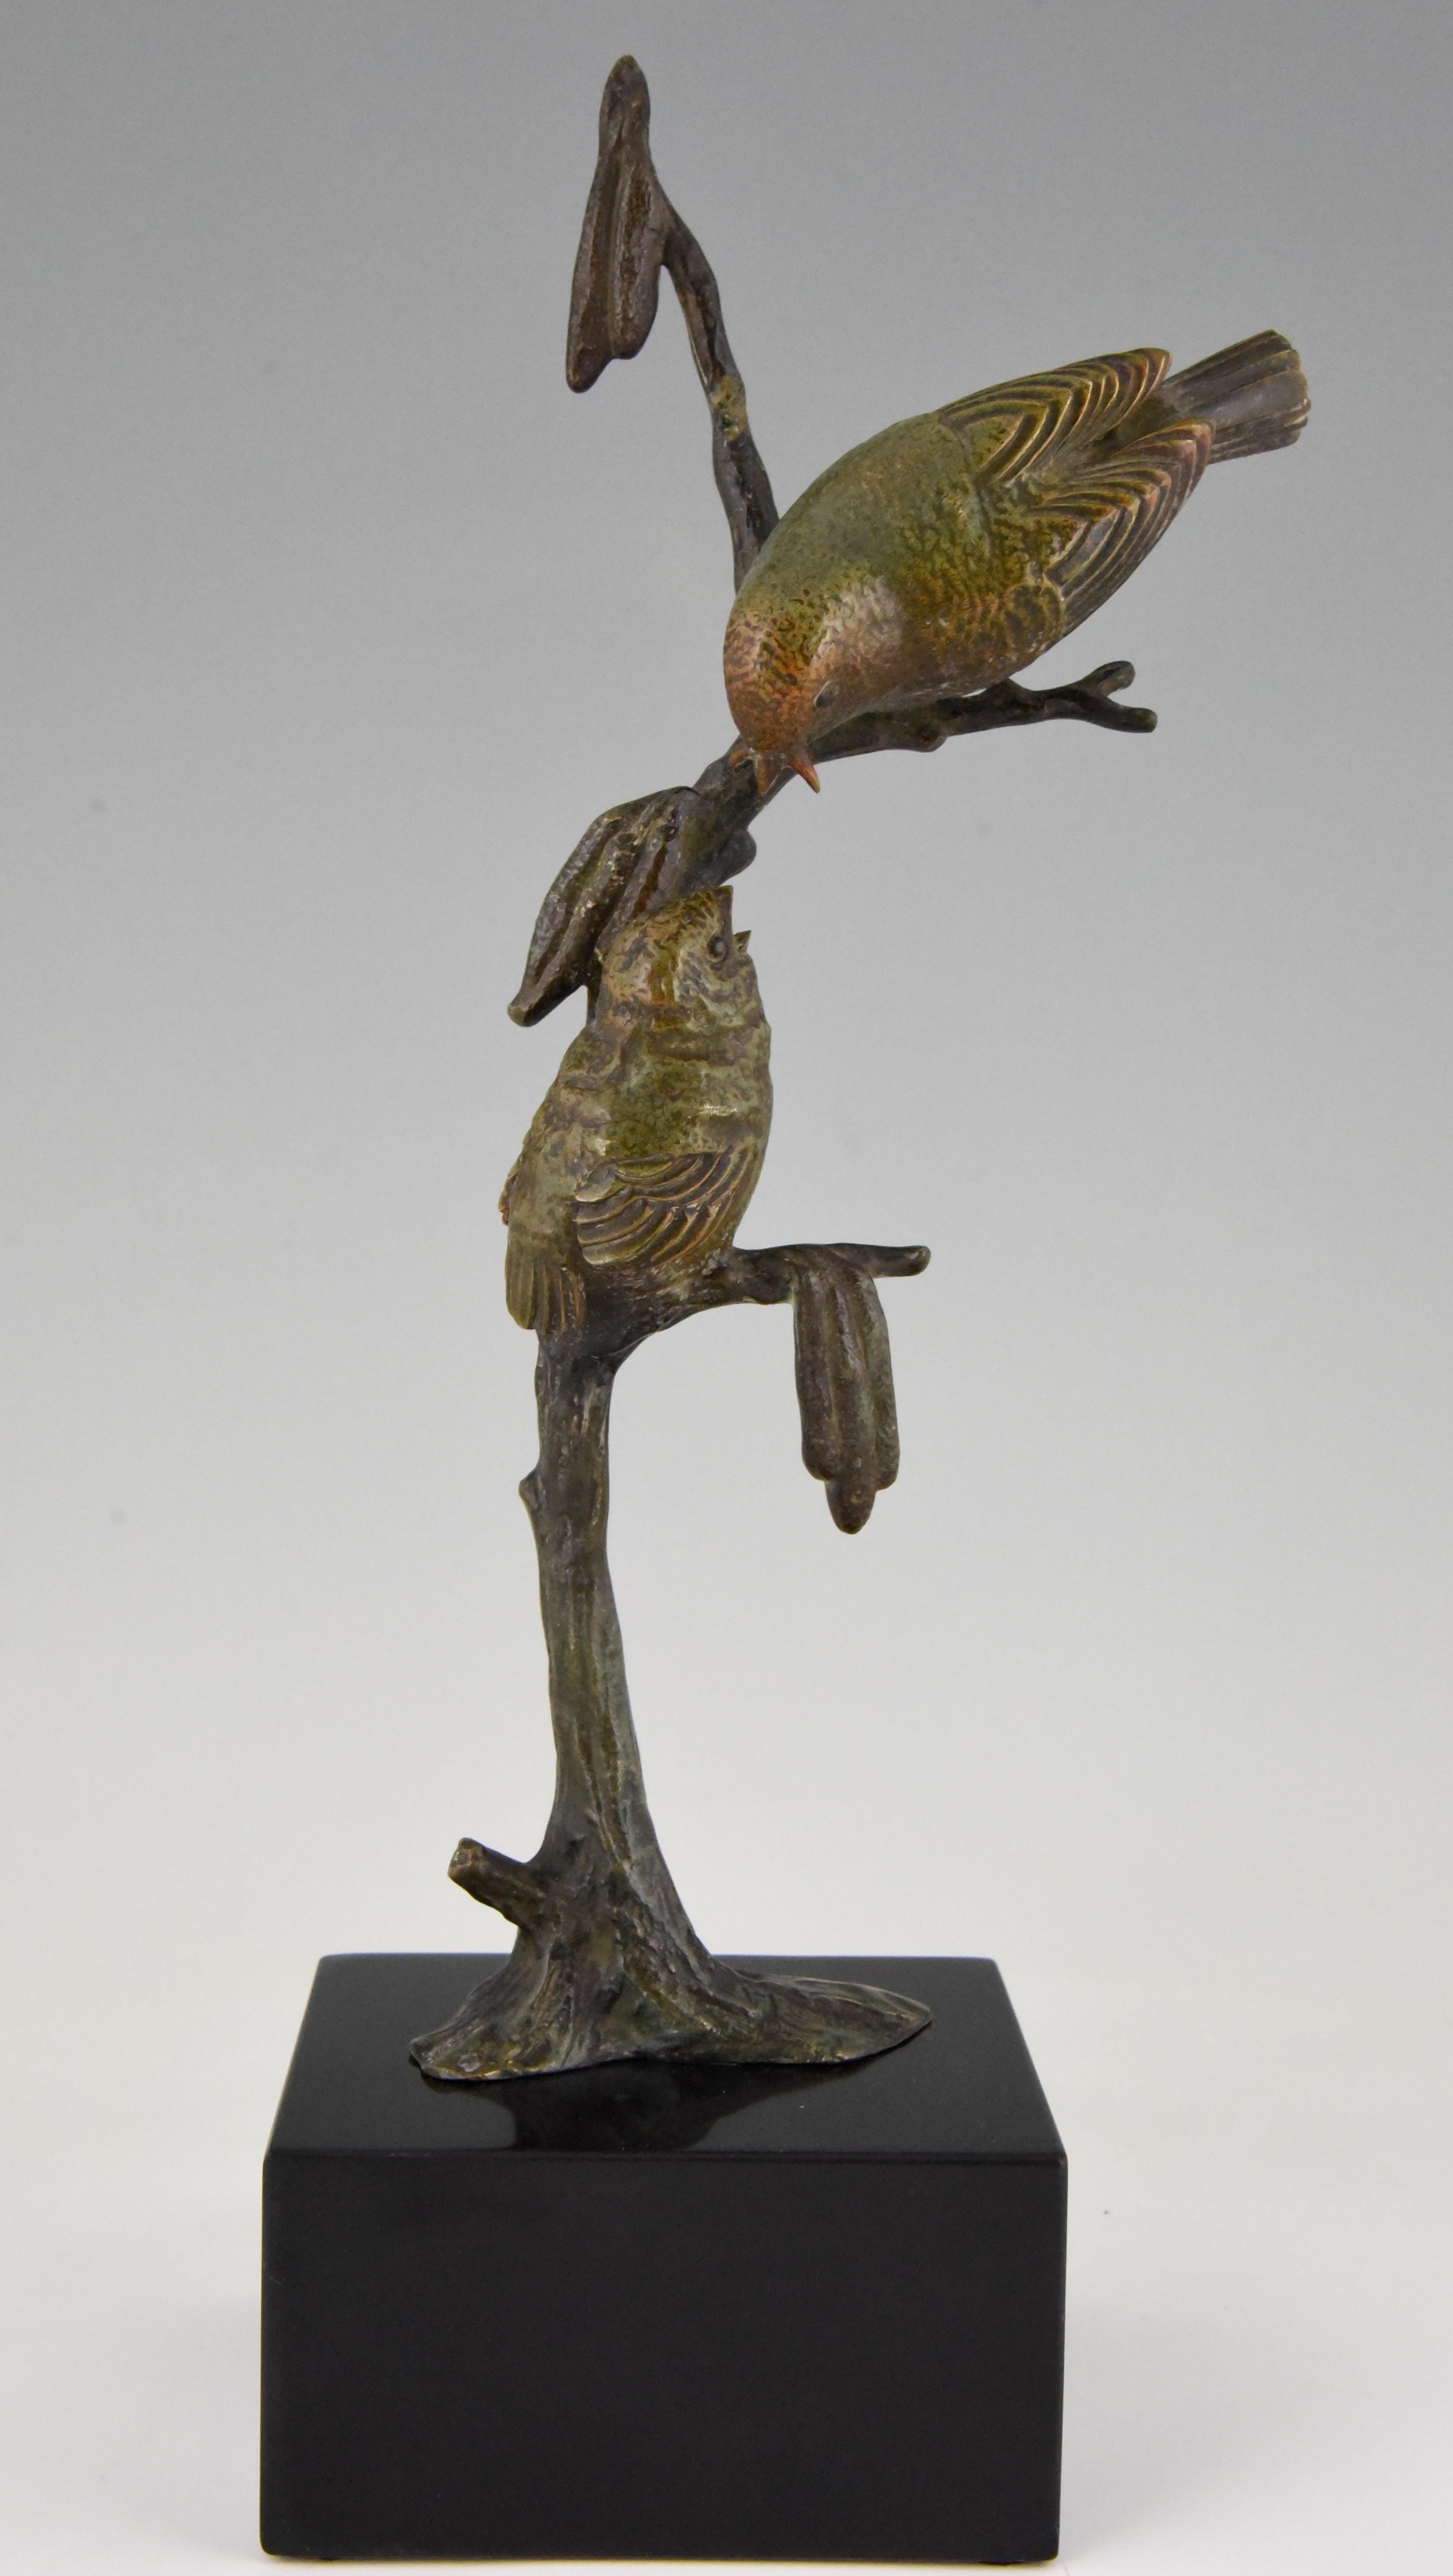 Cute Art Deco bronze sculpture of a two birds on a branch.
The bronze is signed by the French artist Irenee Rochard, has a lovely patina and stands on a Belgian black marble base, circa 1930. 

“Animals in bronze” by Christopher Payne. Antique